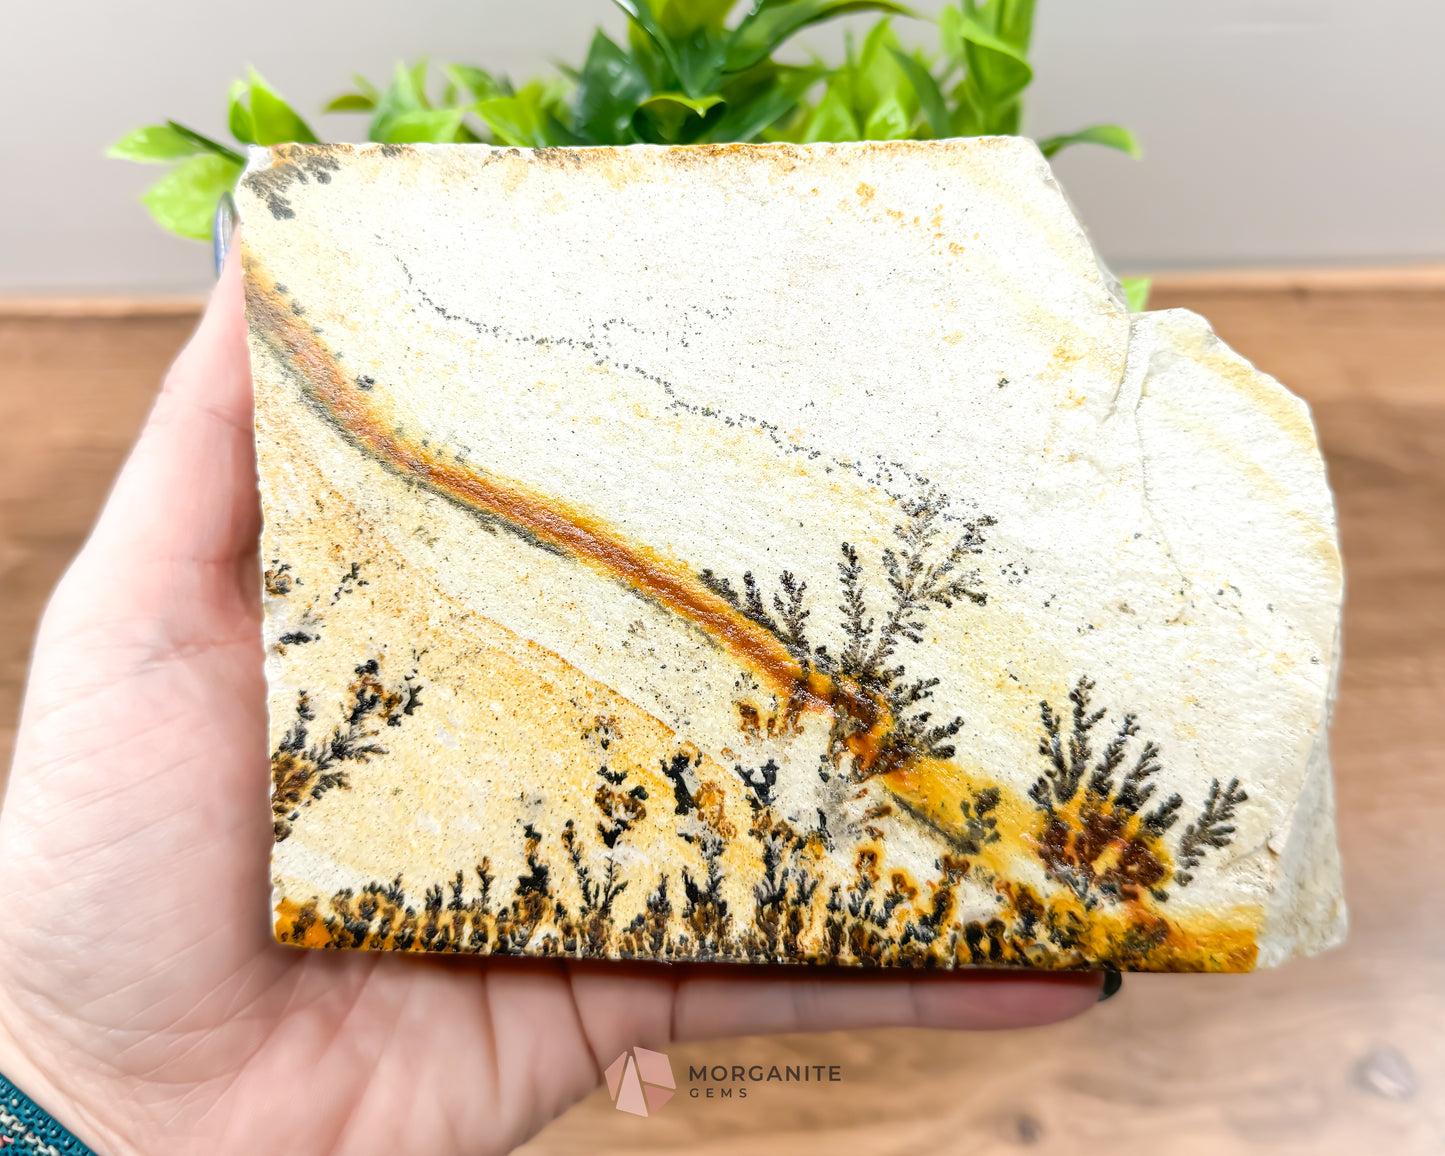 Dendrites from Utah also called "Picture Stone"